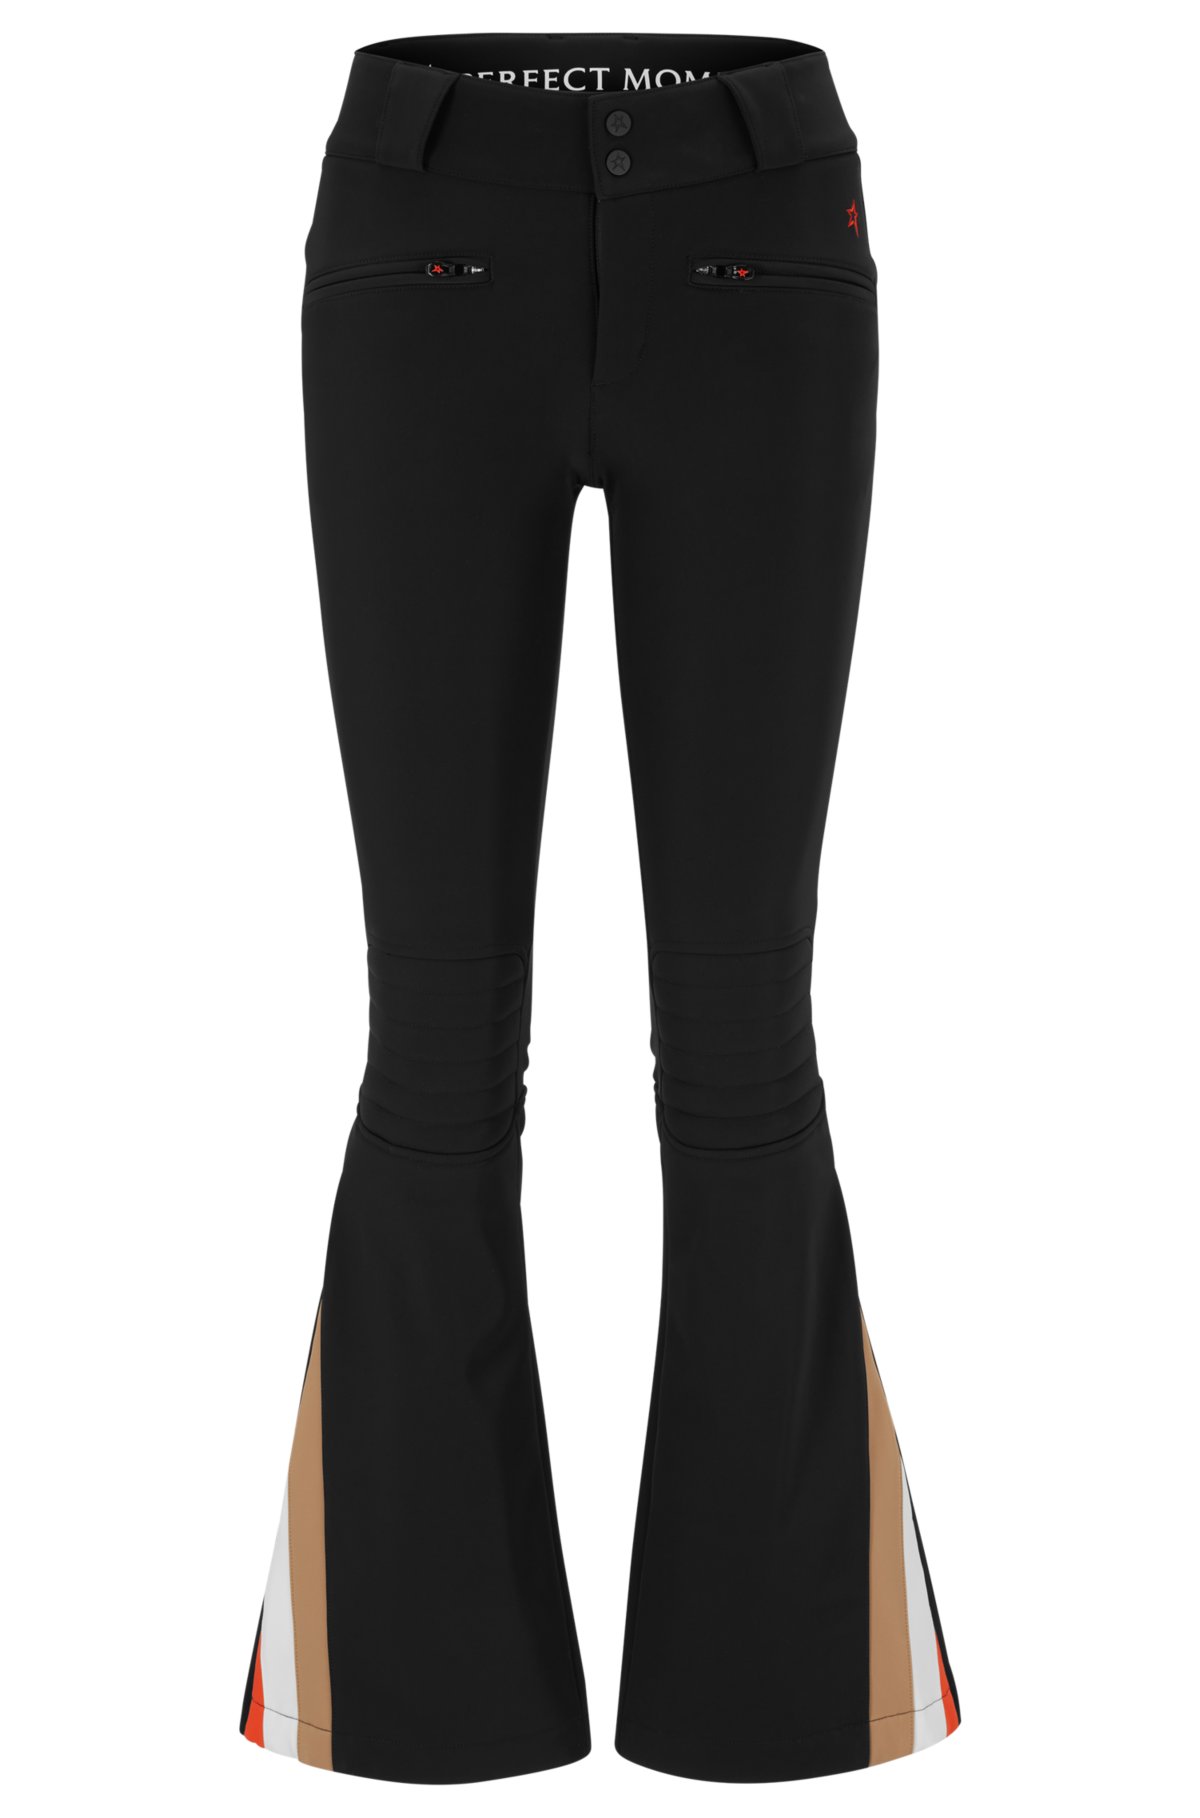 Boss Lady High Waist Pants – The Mom and CEO